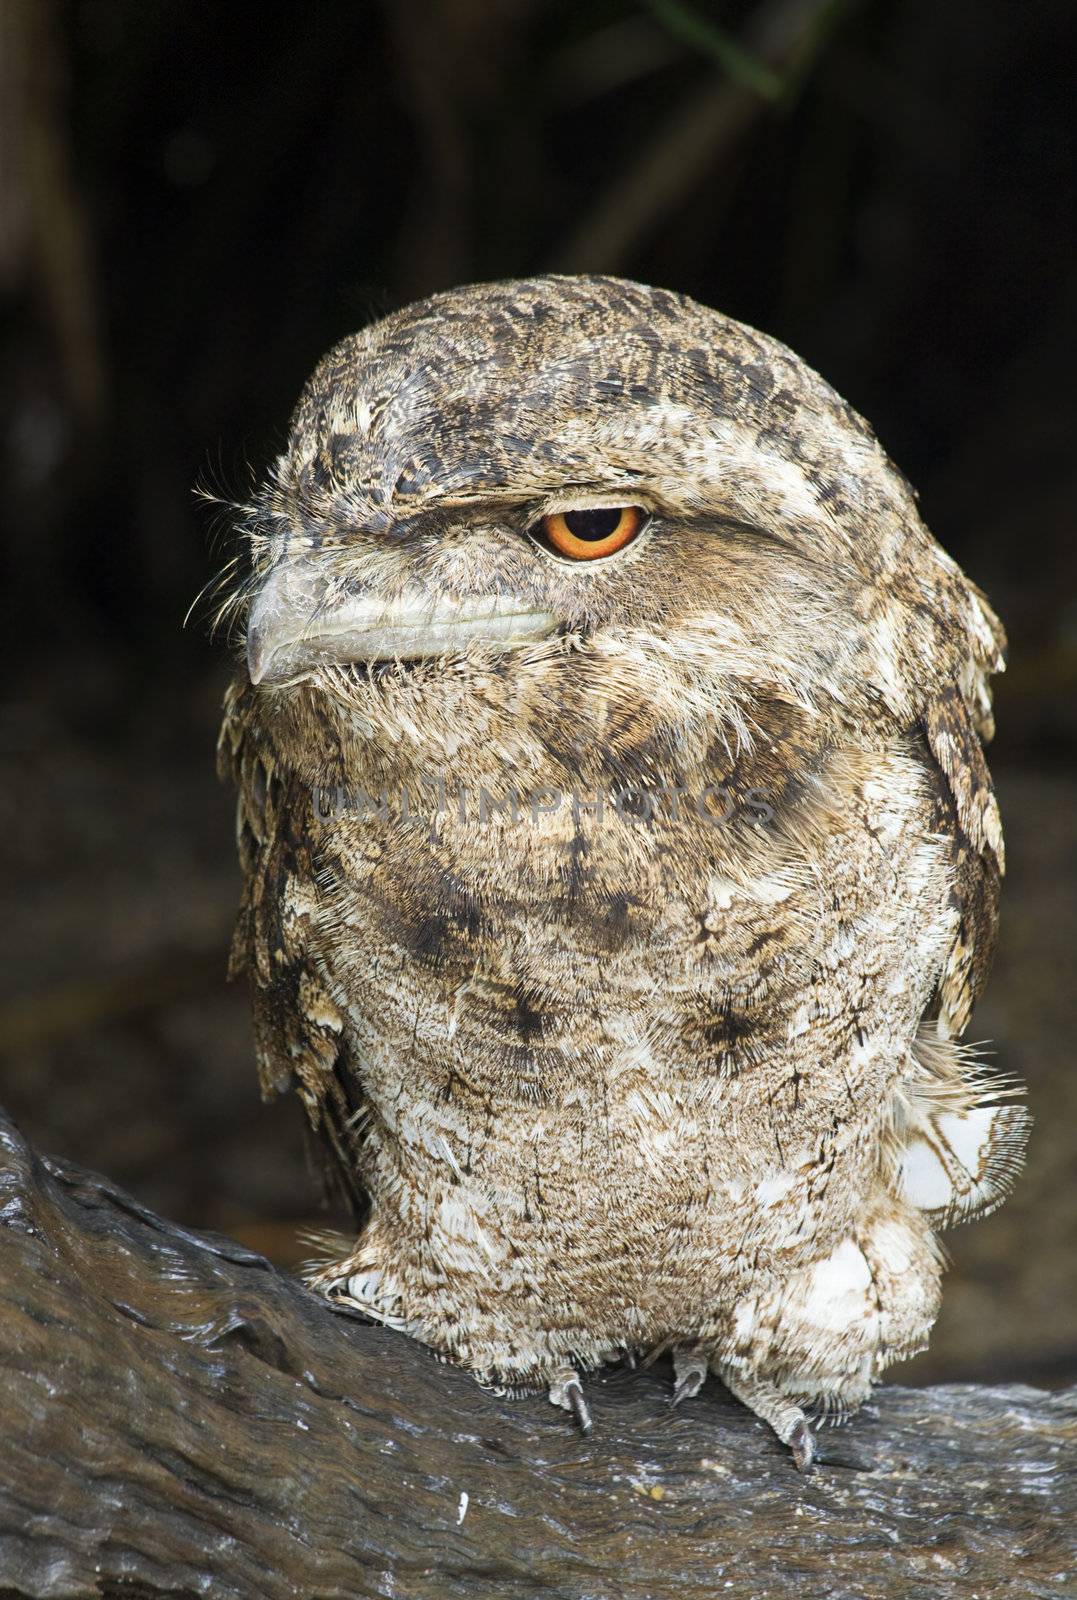 A papuan frogmouth (Podargus papuensis) perching on a log with eyes open